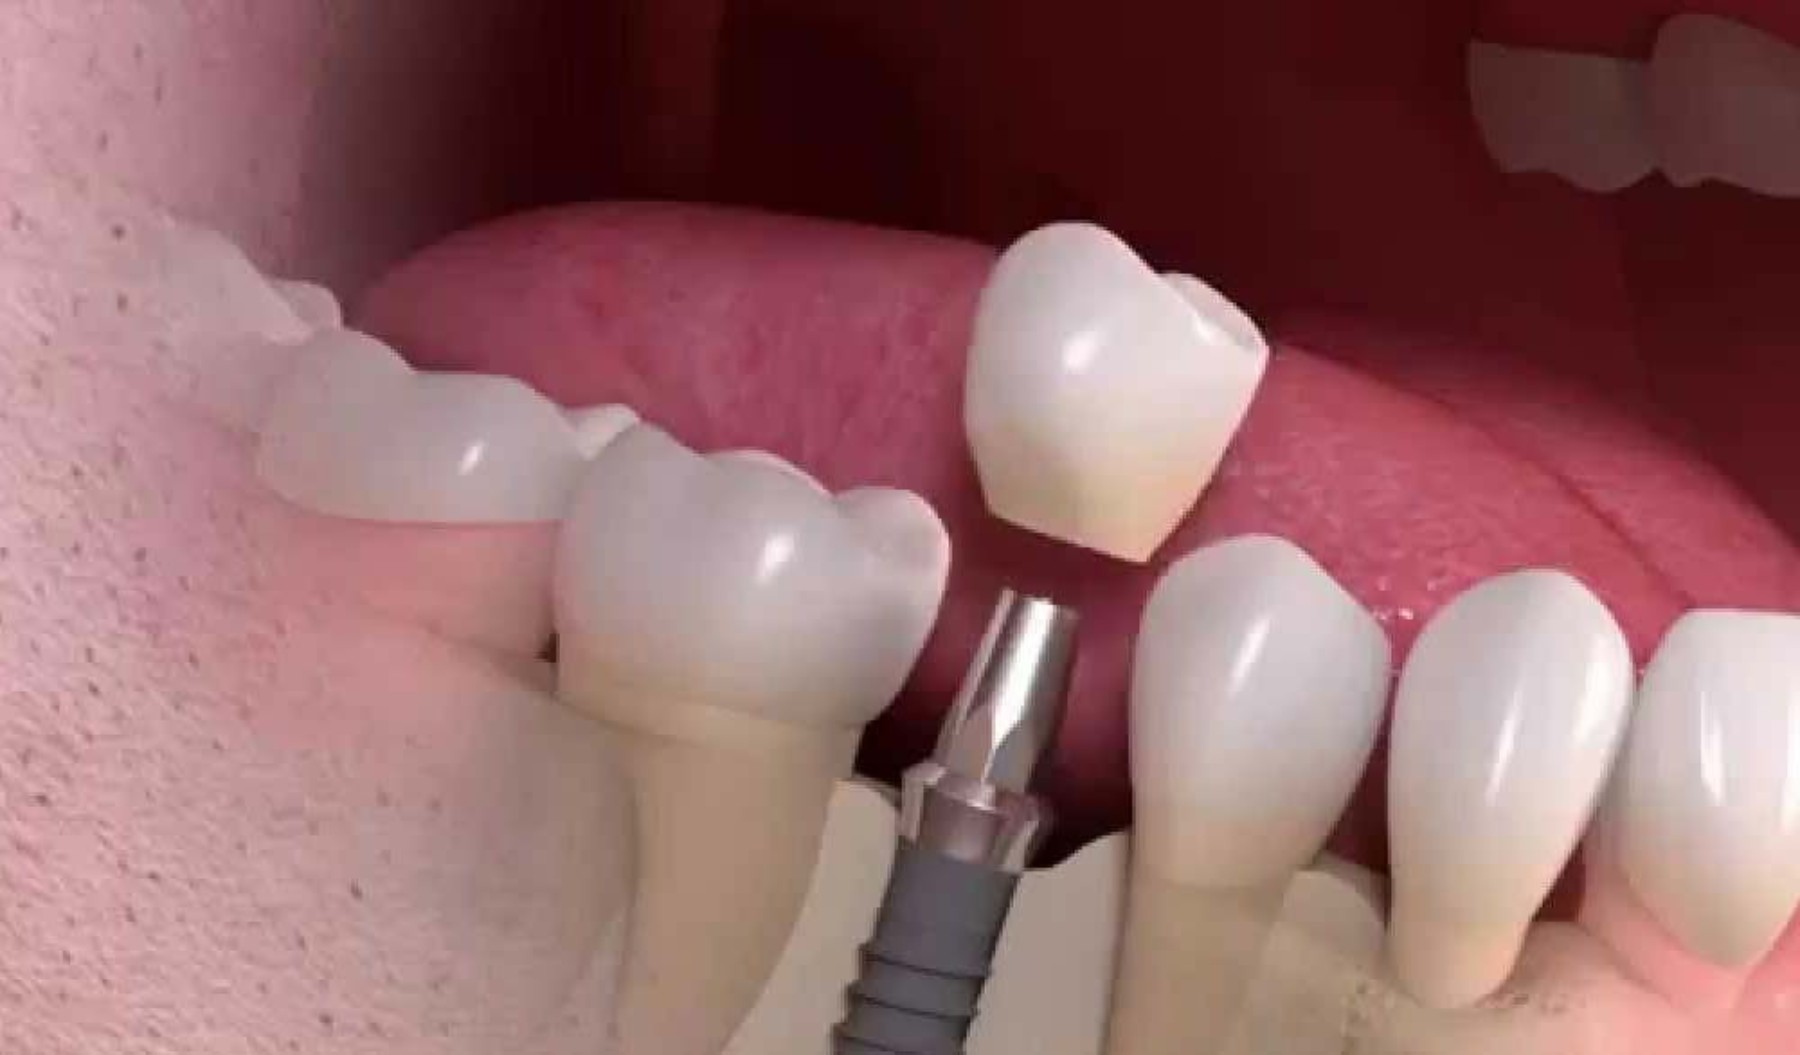 Can You Get a Temporary Tooth During the Dental Implant Process